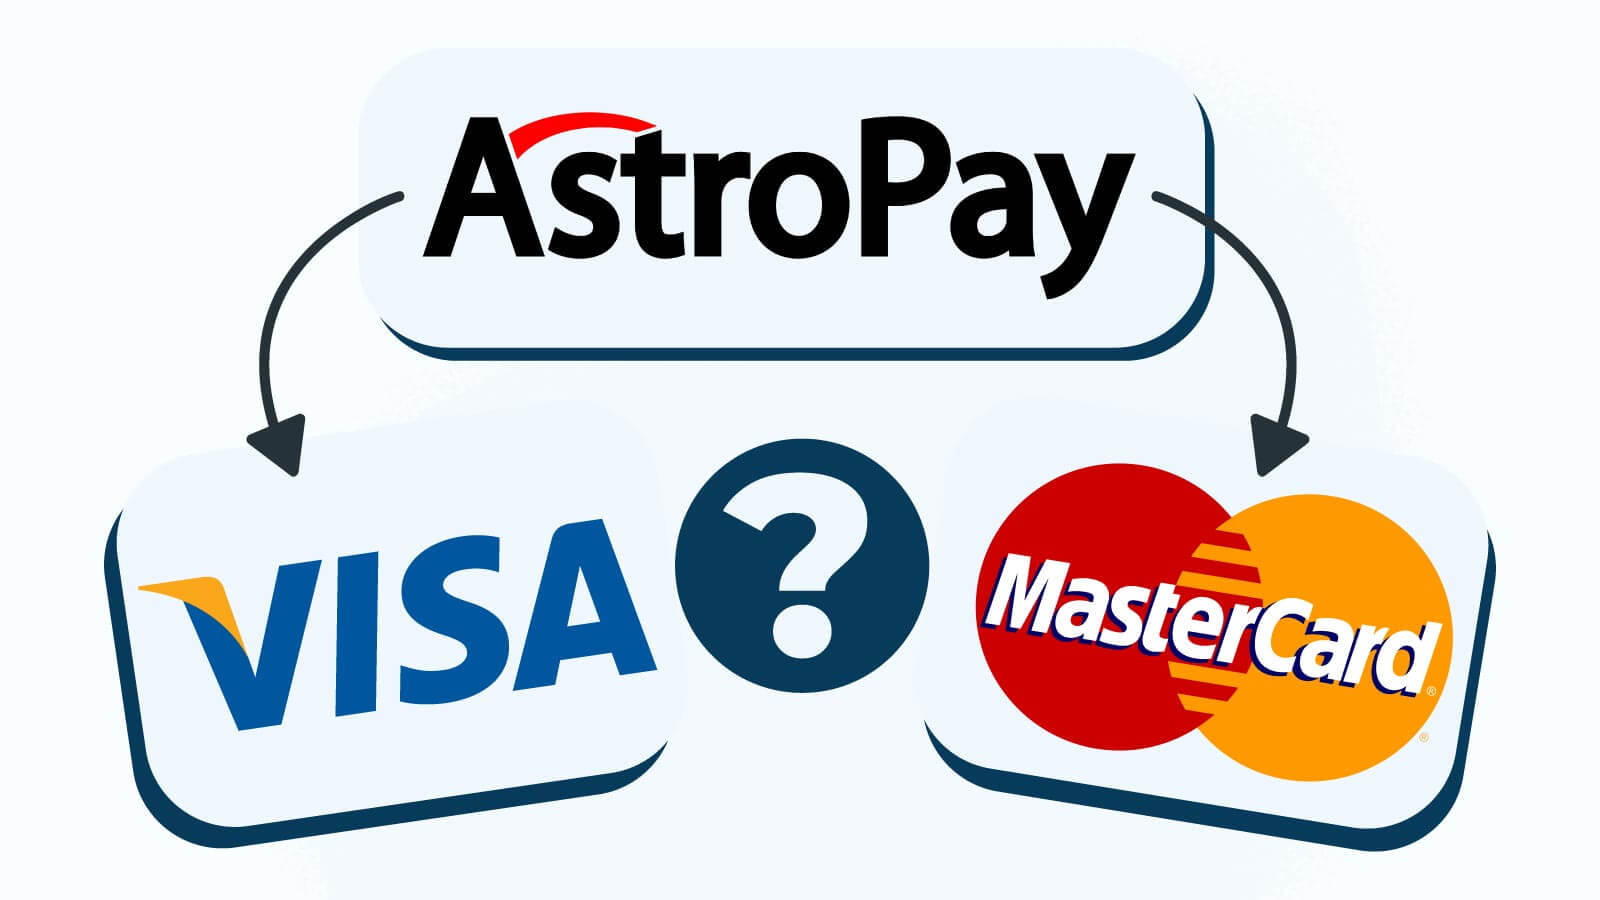 Is AstroPay a Visa or Mastercard